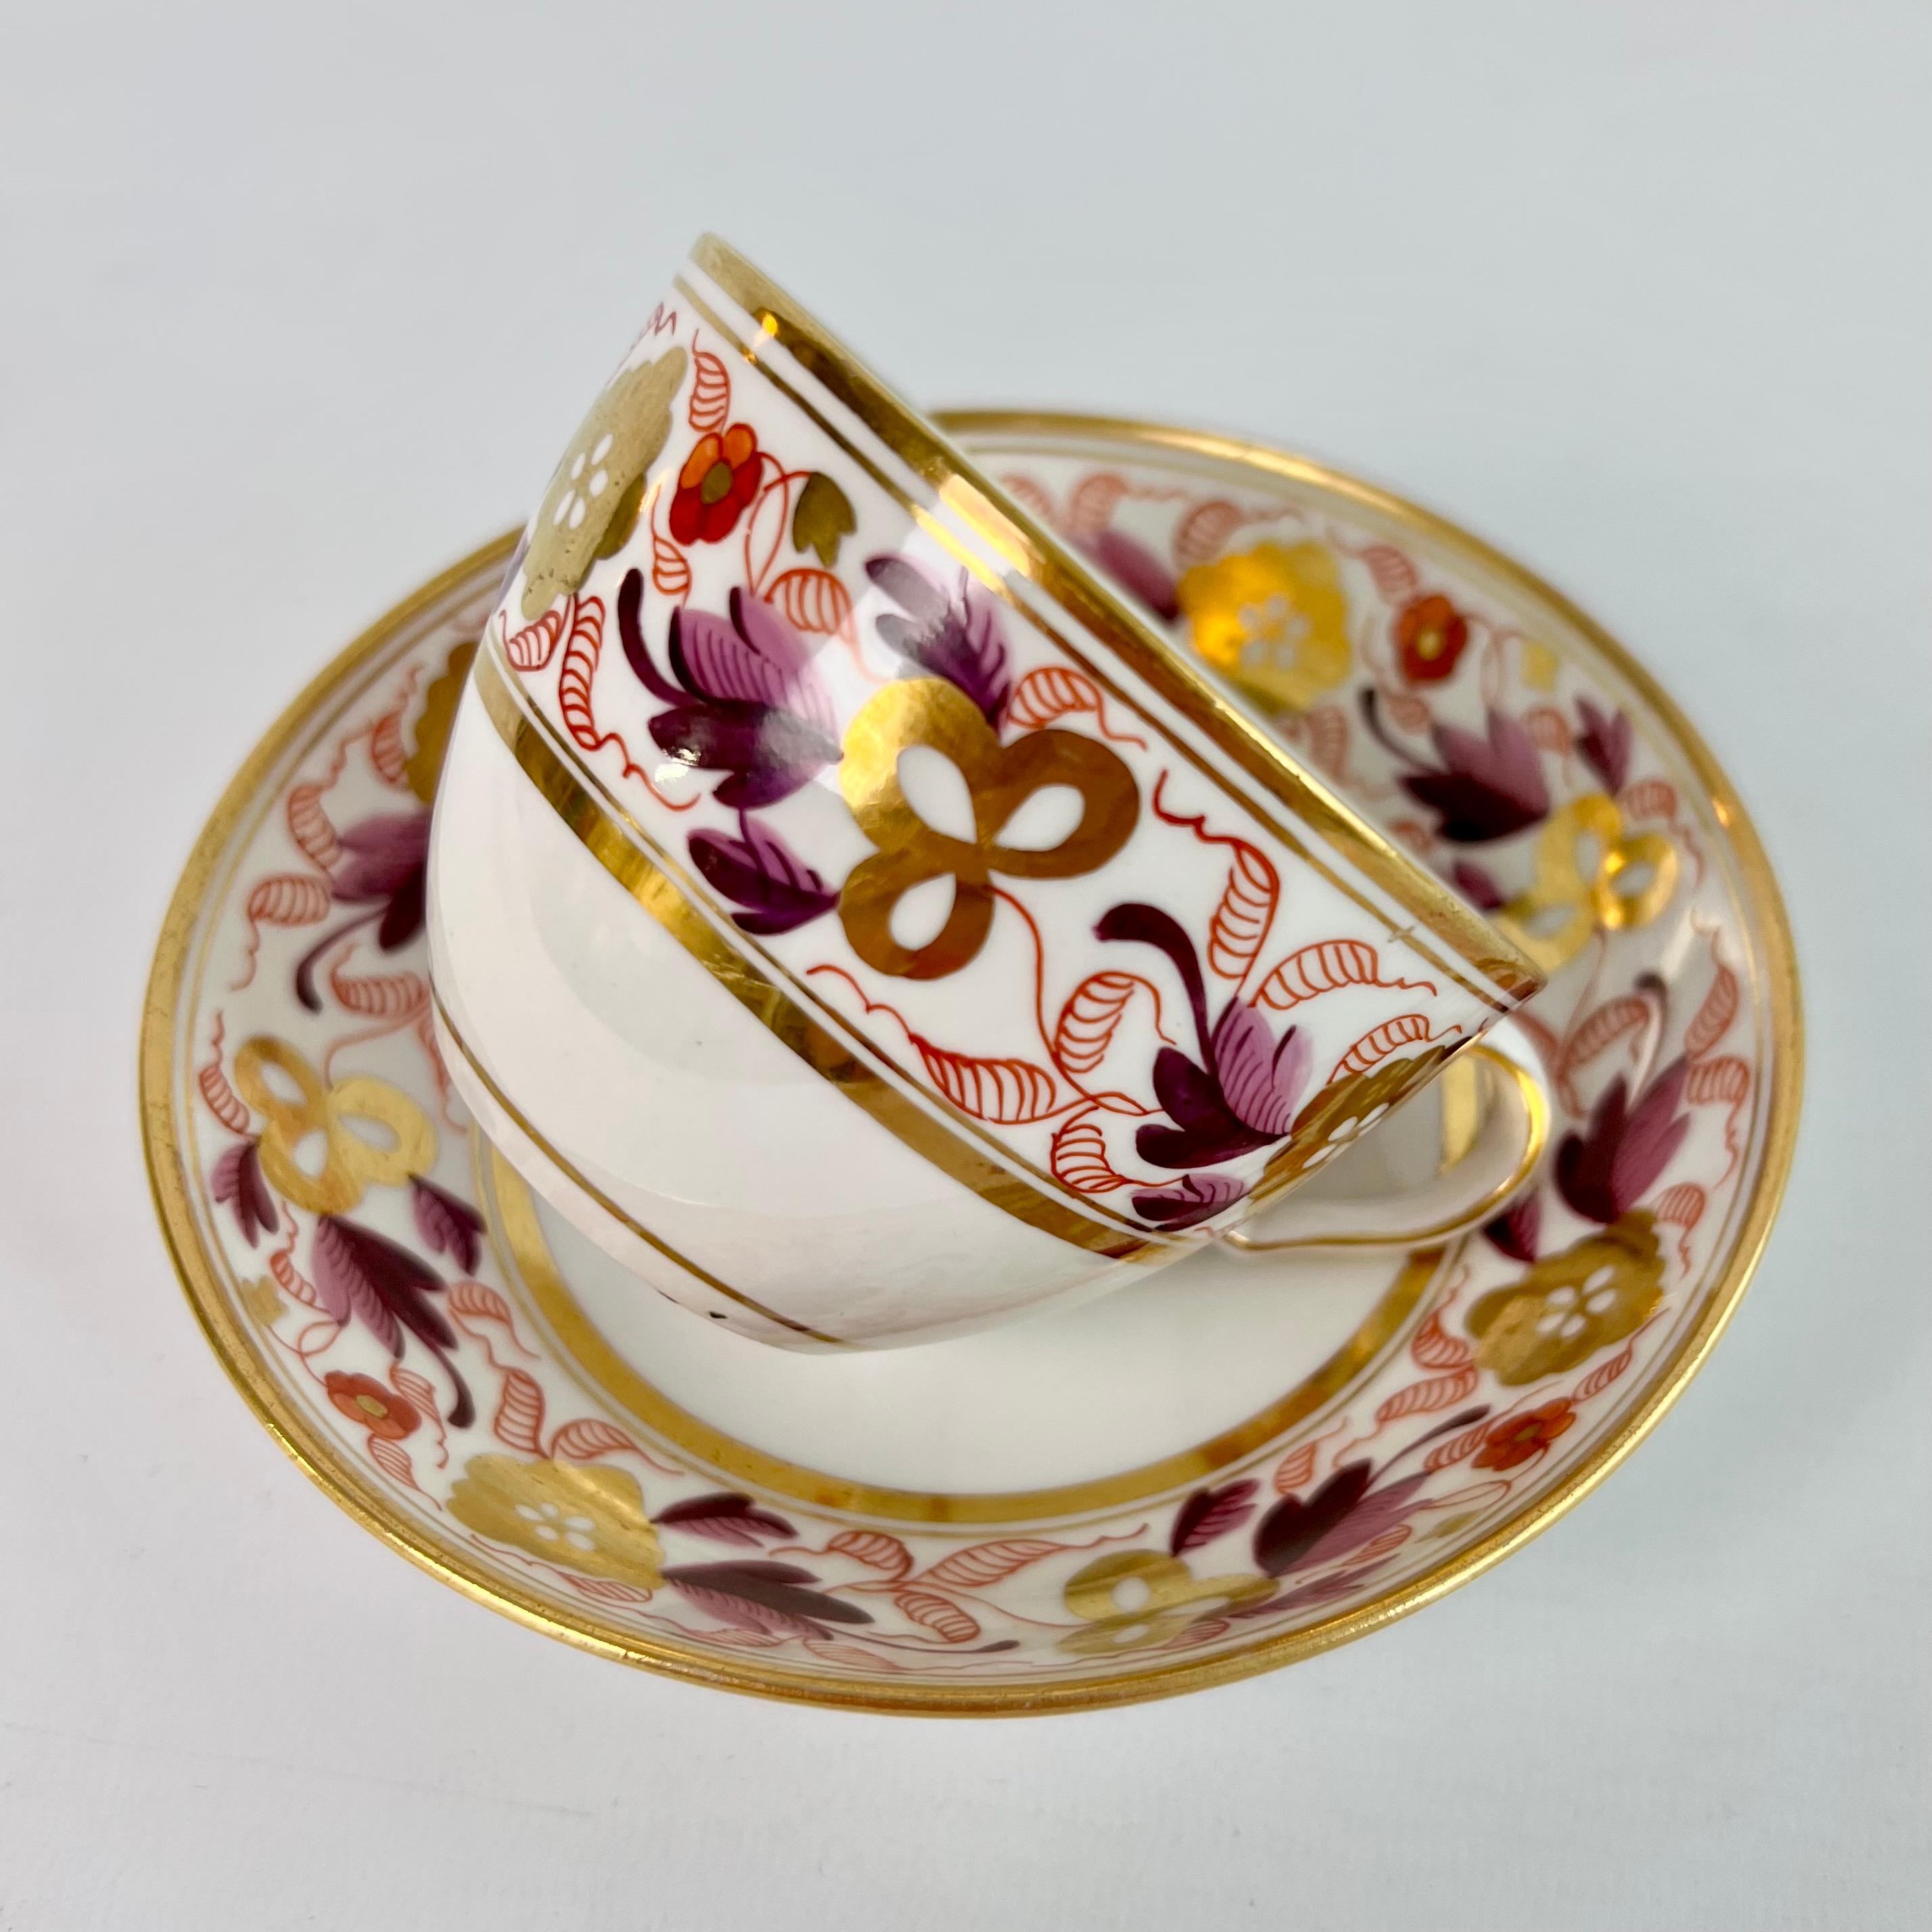 Hand-Painted Spode Porcelain Teacup Trio, Puce and Gilt Floral Pattern, Neoclassical ca 1810